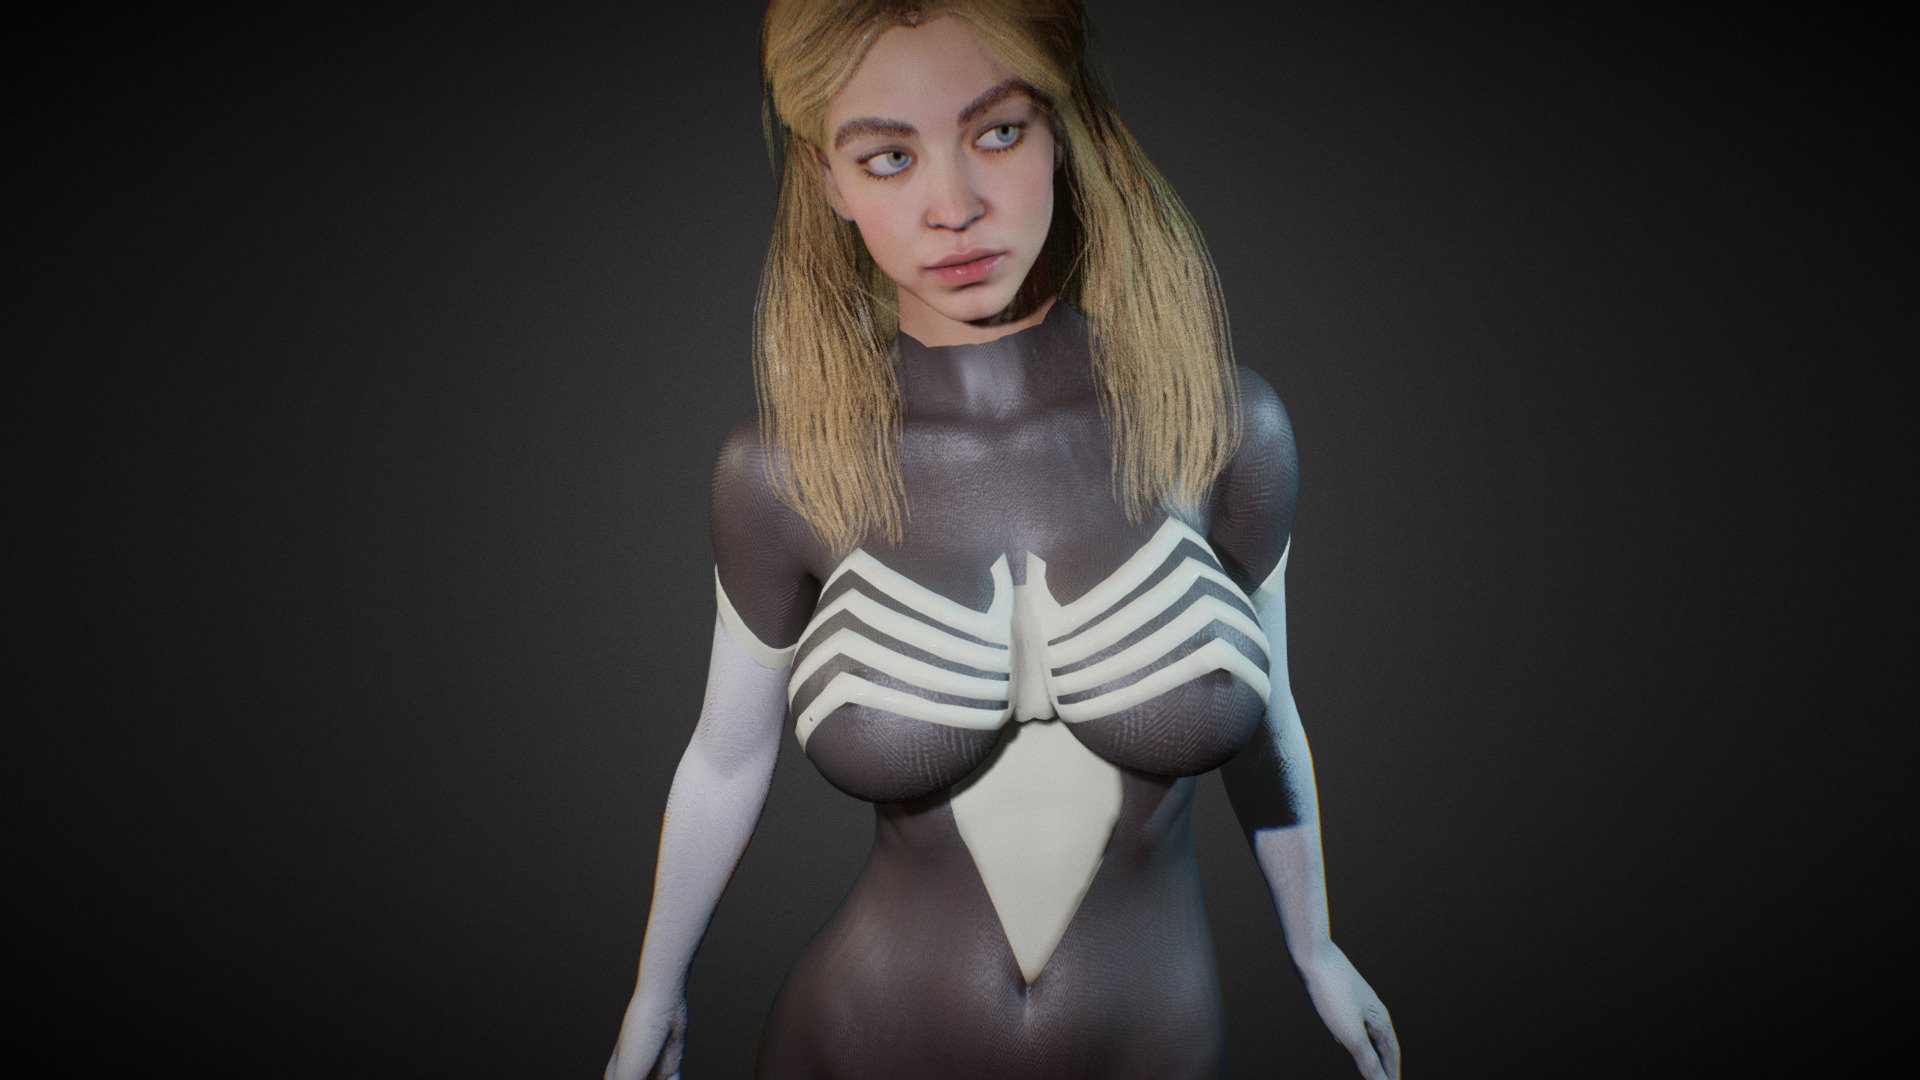 * PLEASE DOWNLOAD THE RAR INSIDE THE ADDITIONAL FILES!!!
Spider Woman with mask. Model in Blender file. Fully rigged. SSS subsurface scattering. mixamo bone names for animation. includes 2 hair styles and 1 extra shapekey 3d model